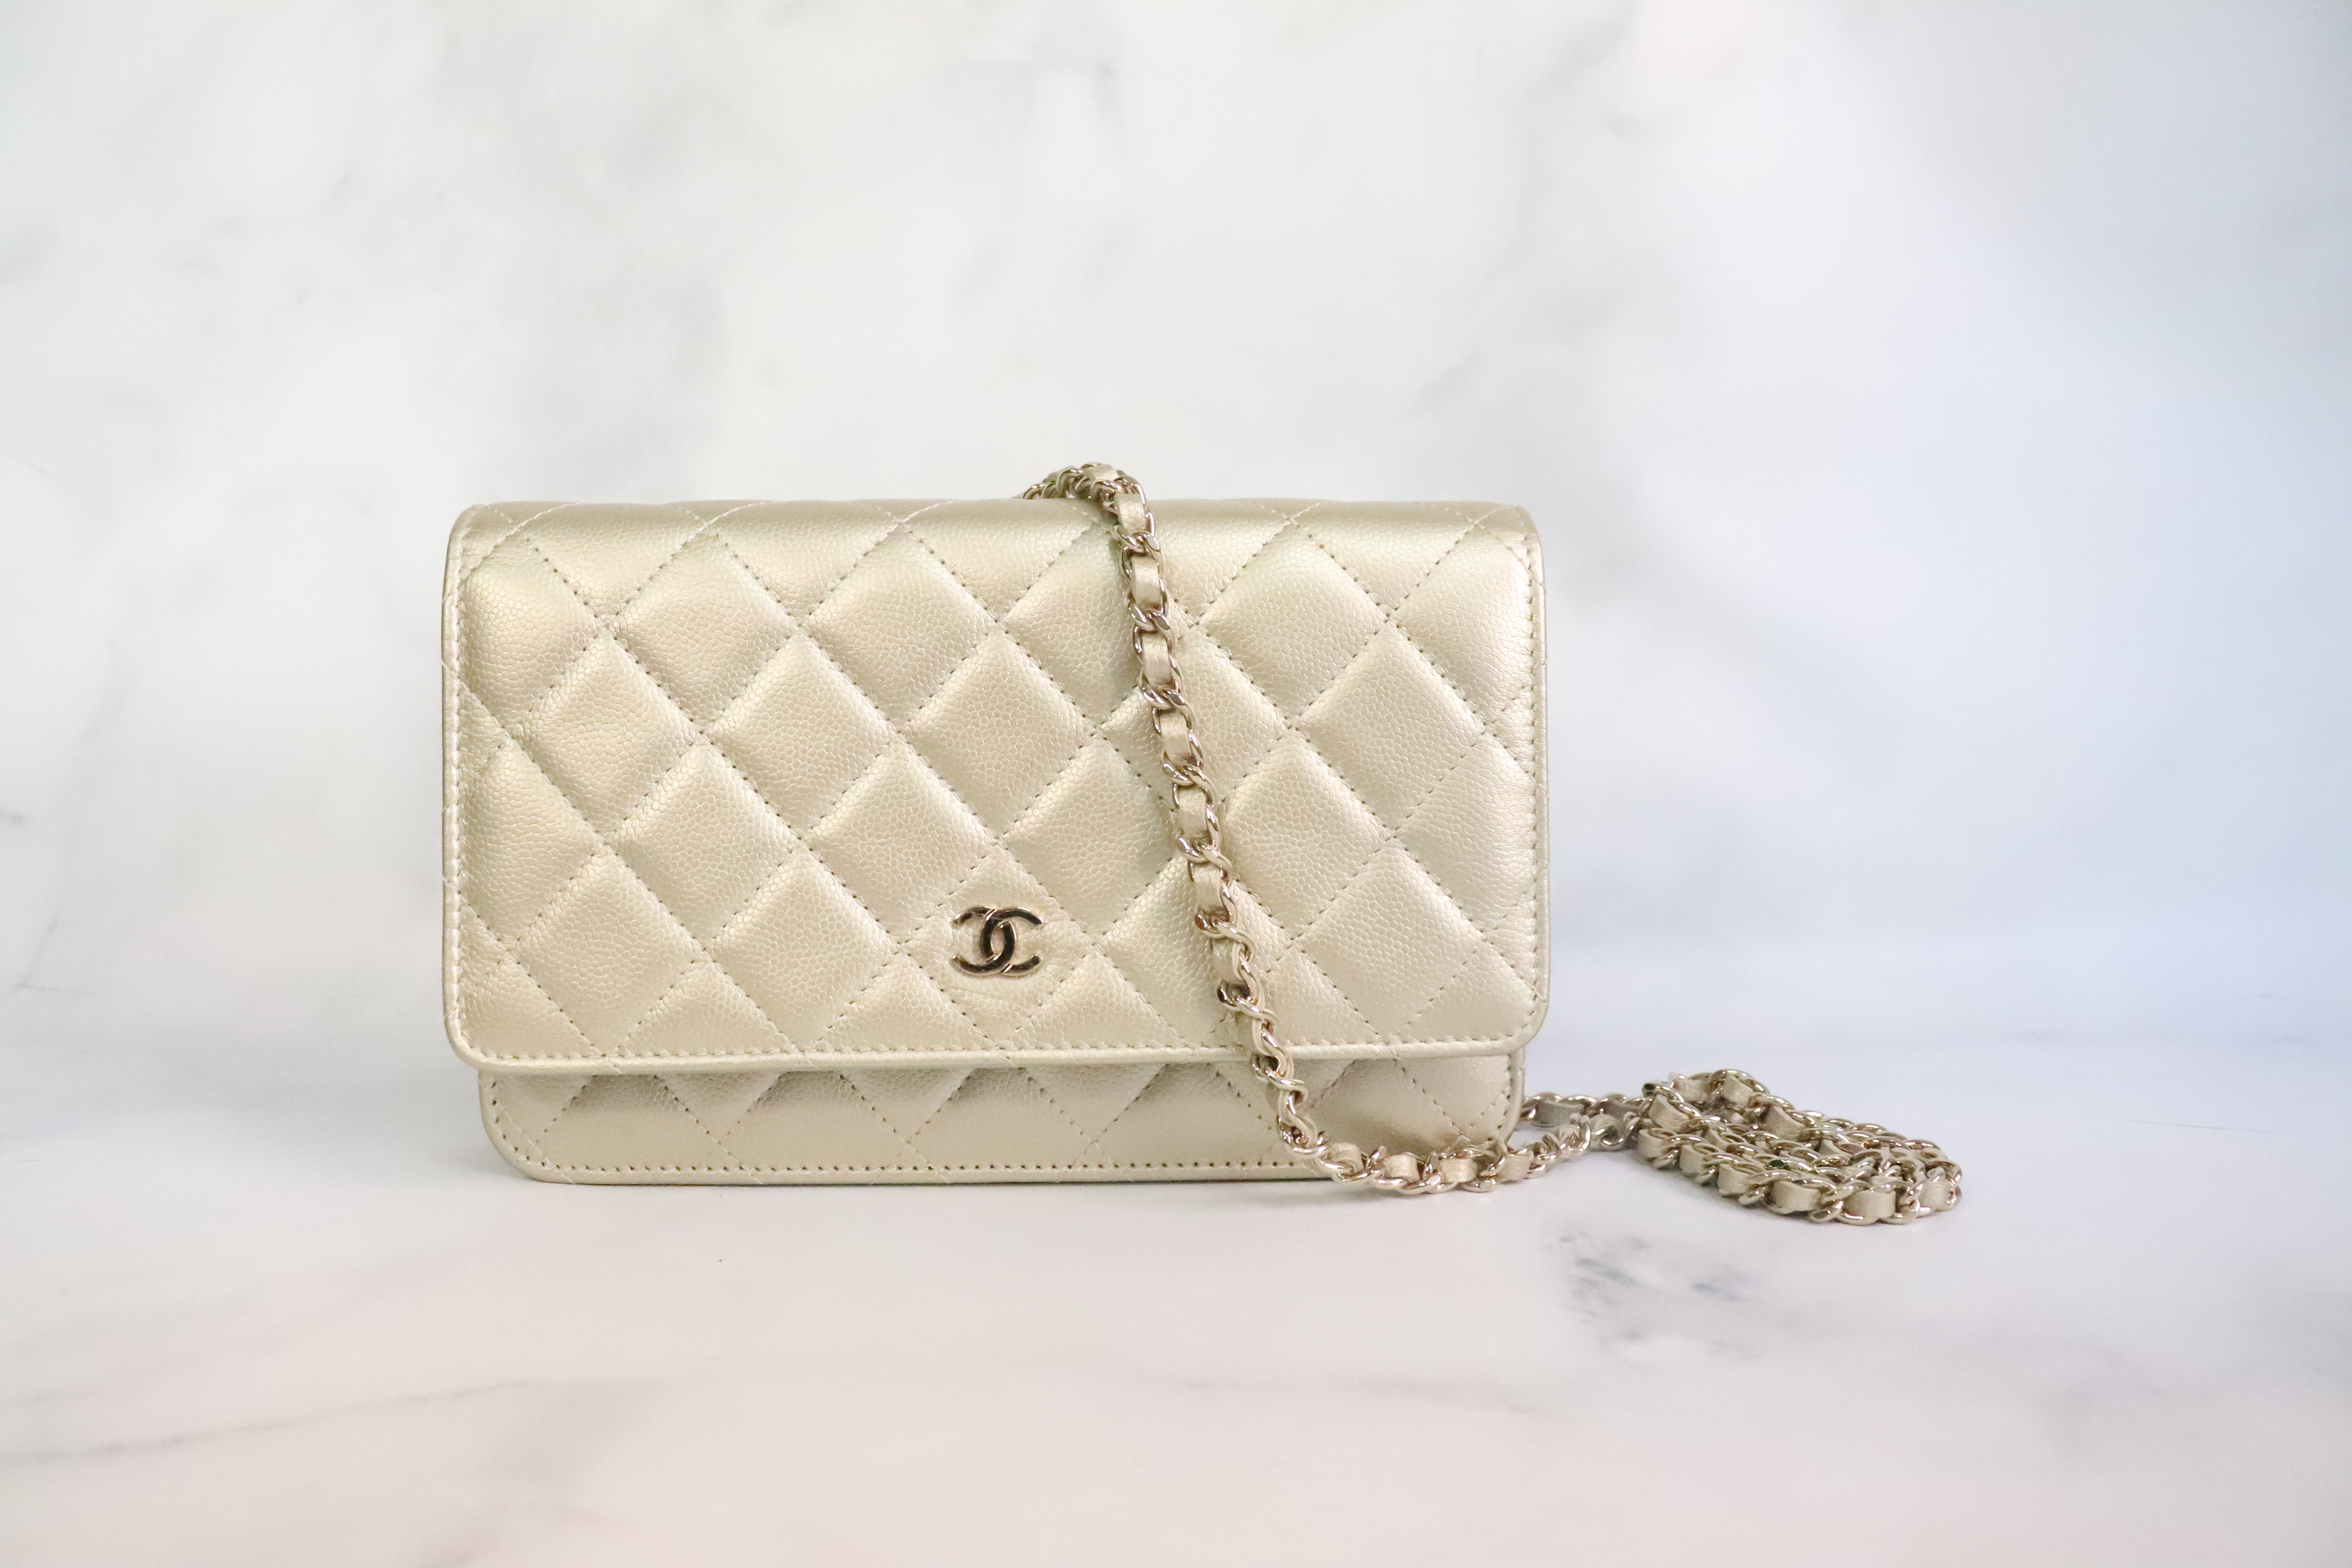 Chanel Wallet on Chain, Light Gold Caviar Leather, Gold Hardware, New in Box  - Julia Rose Boston